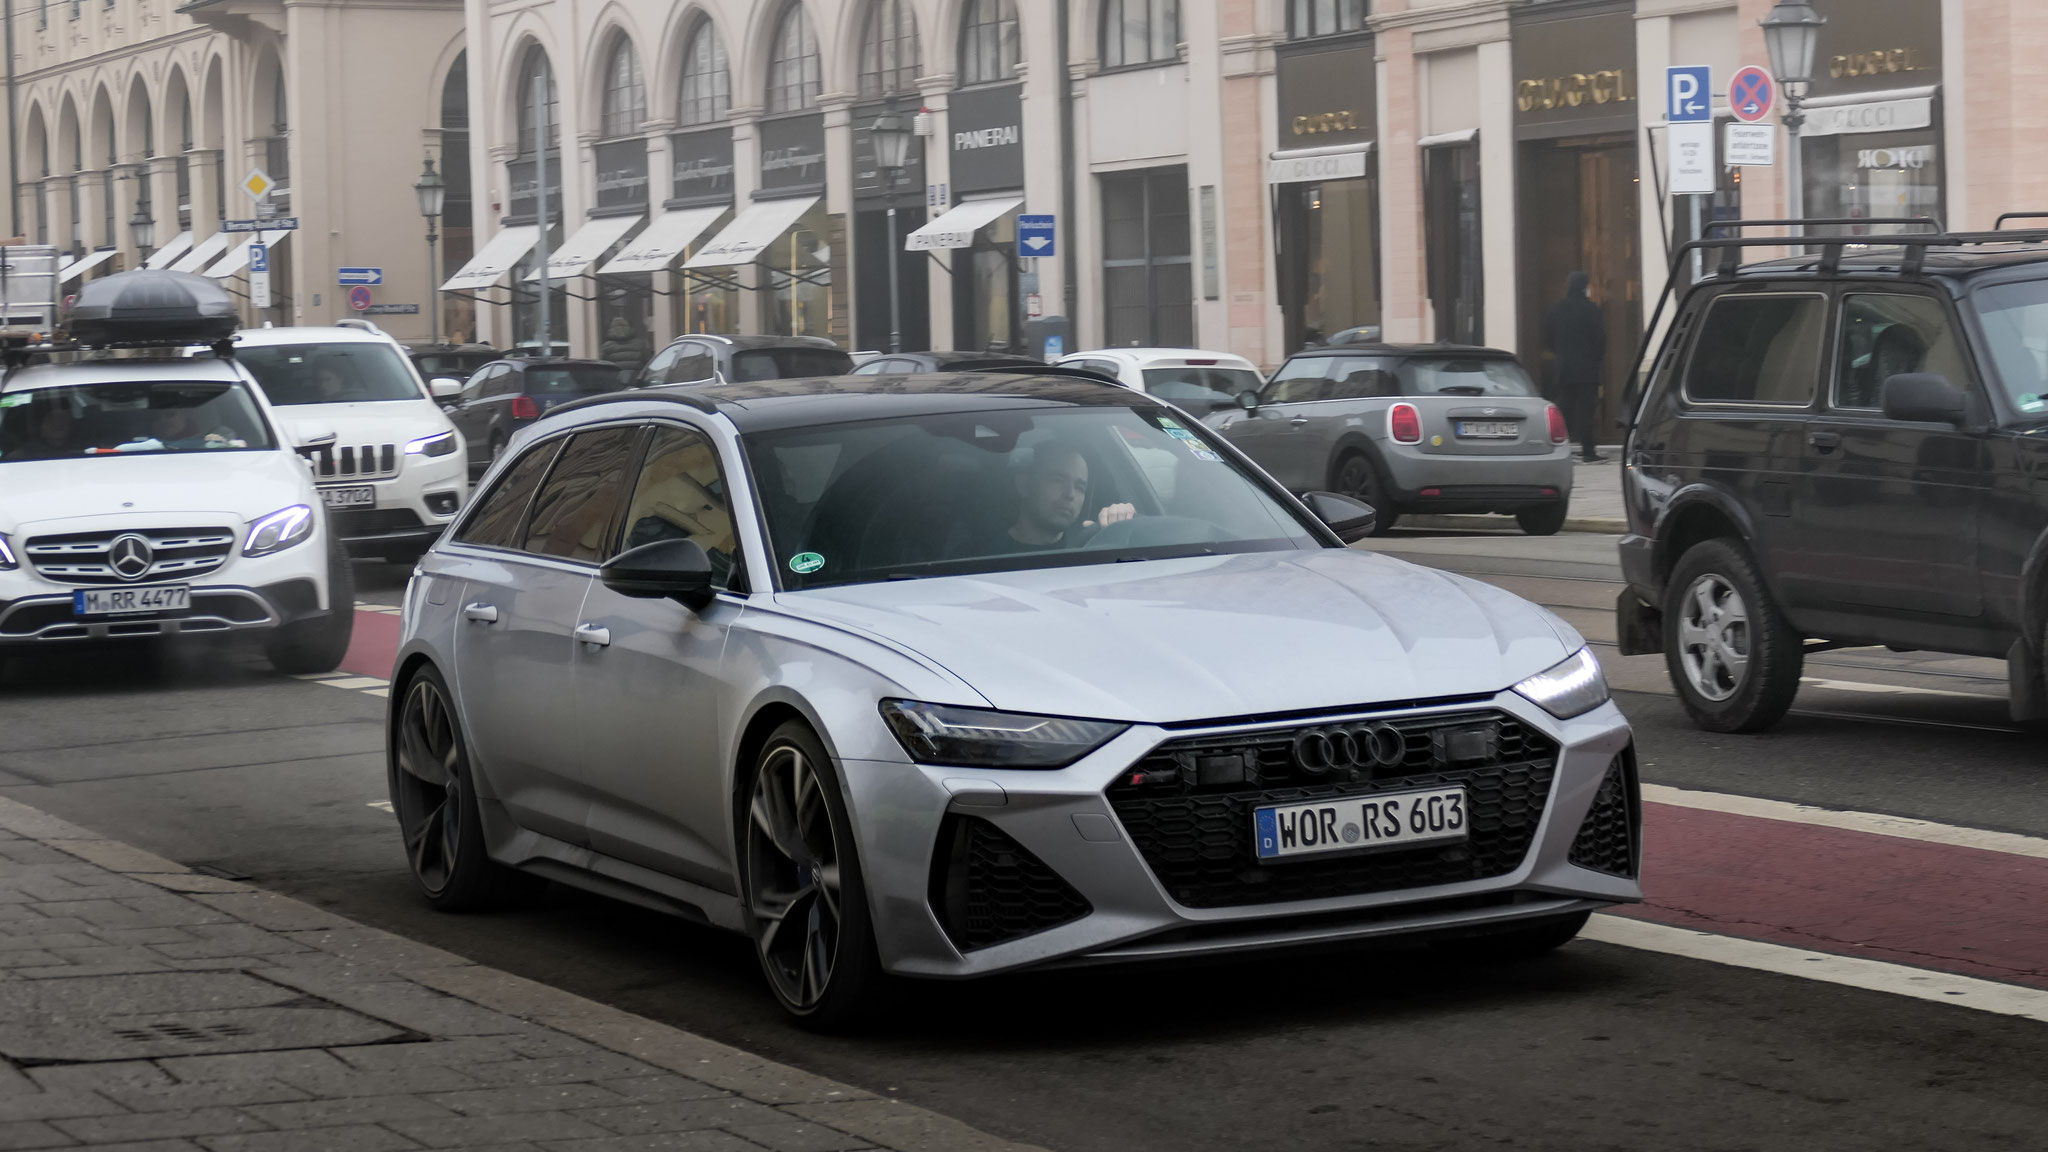 Audi RS6 - WOR-RS-603